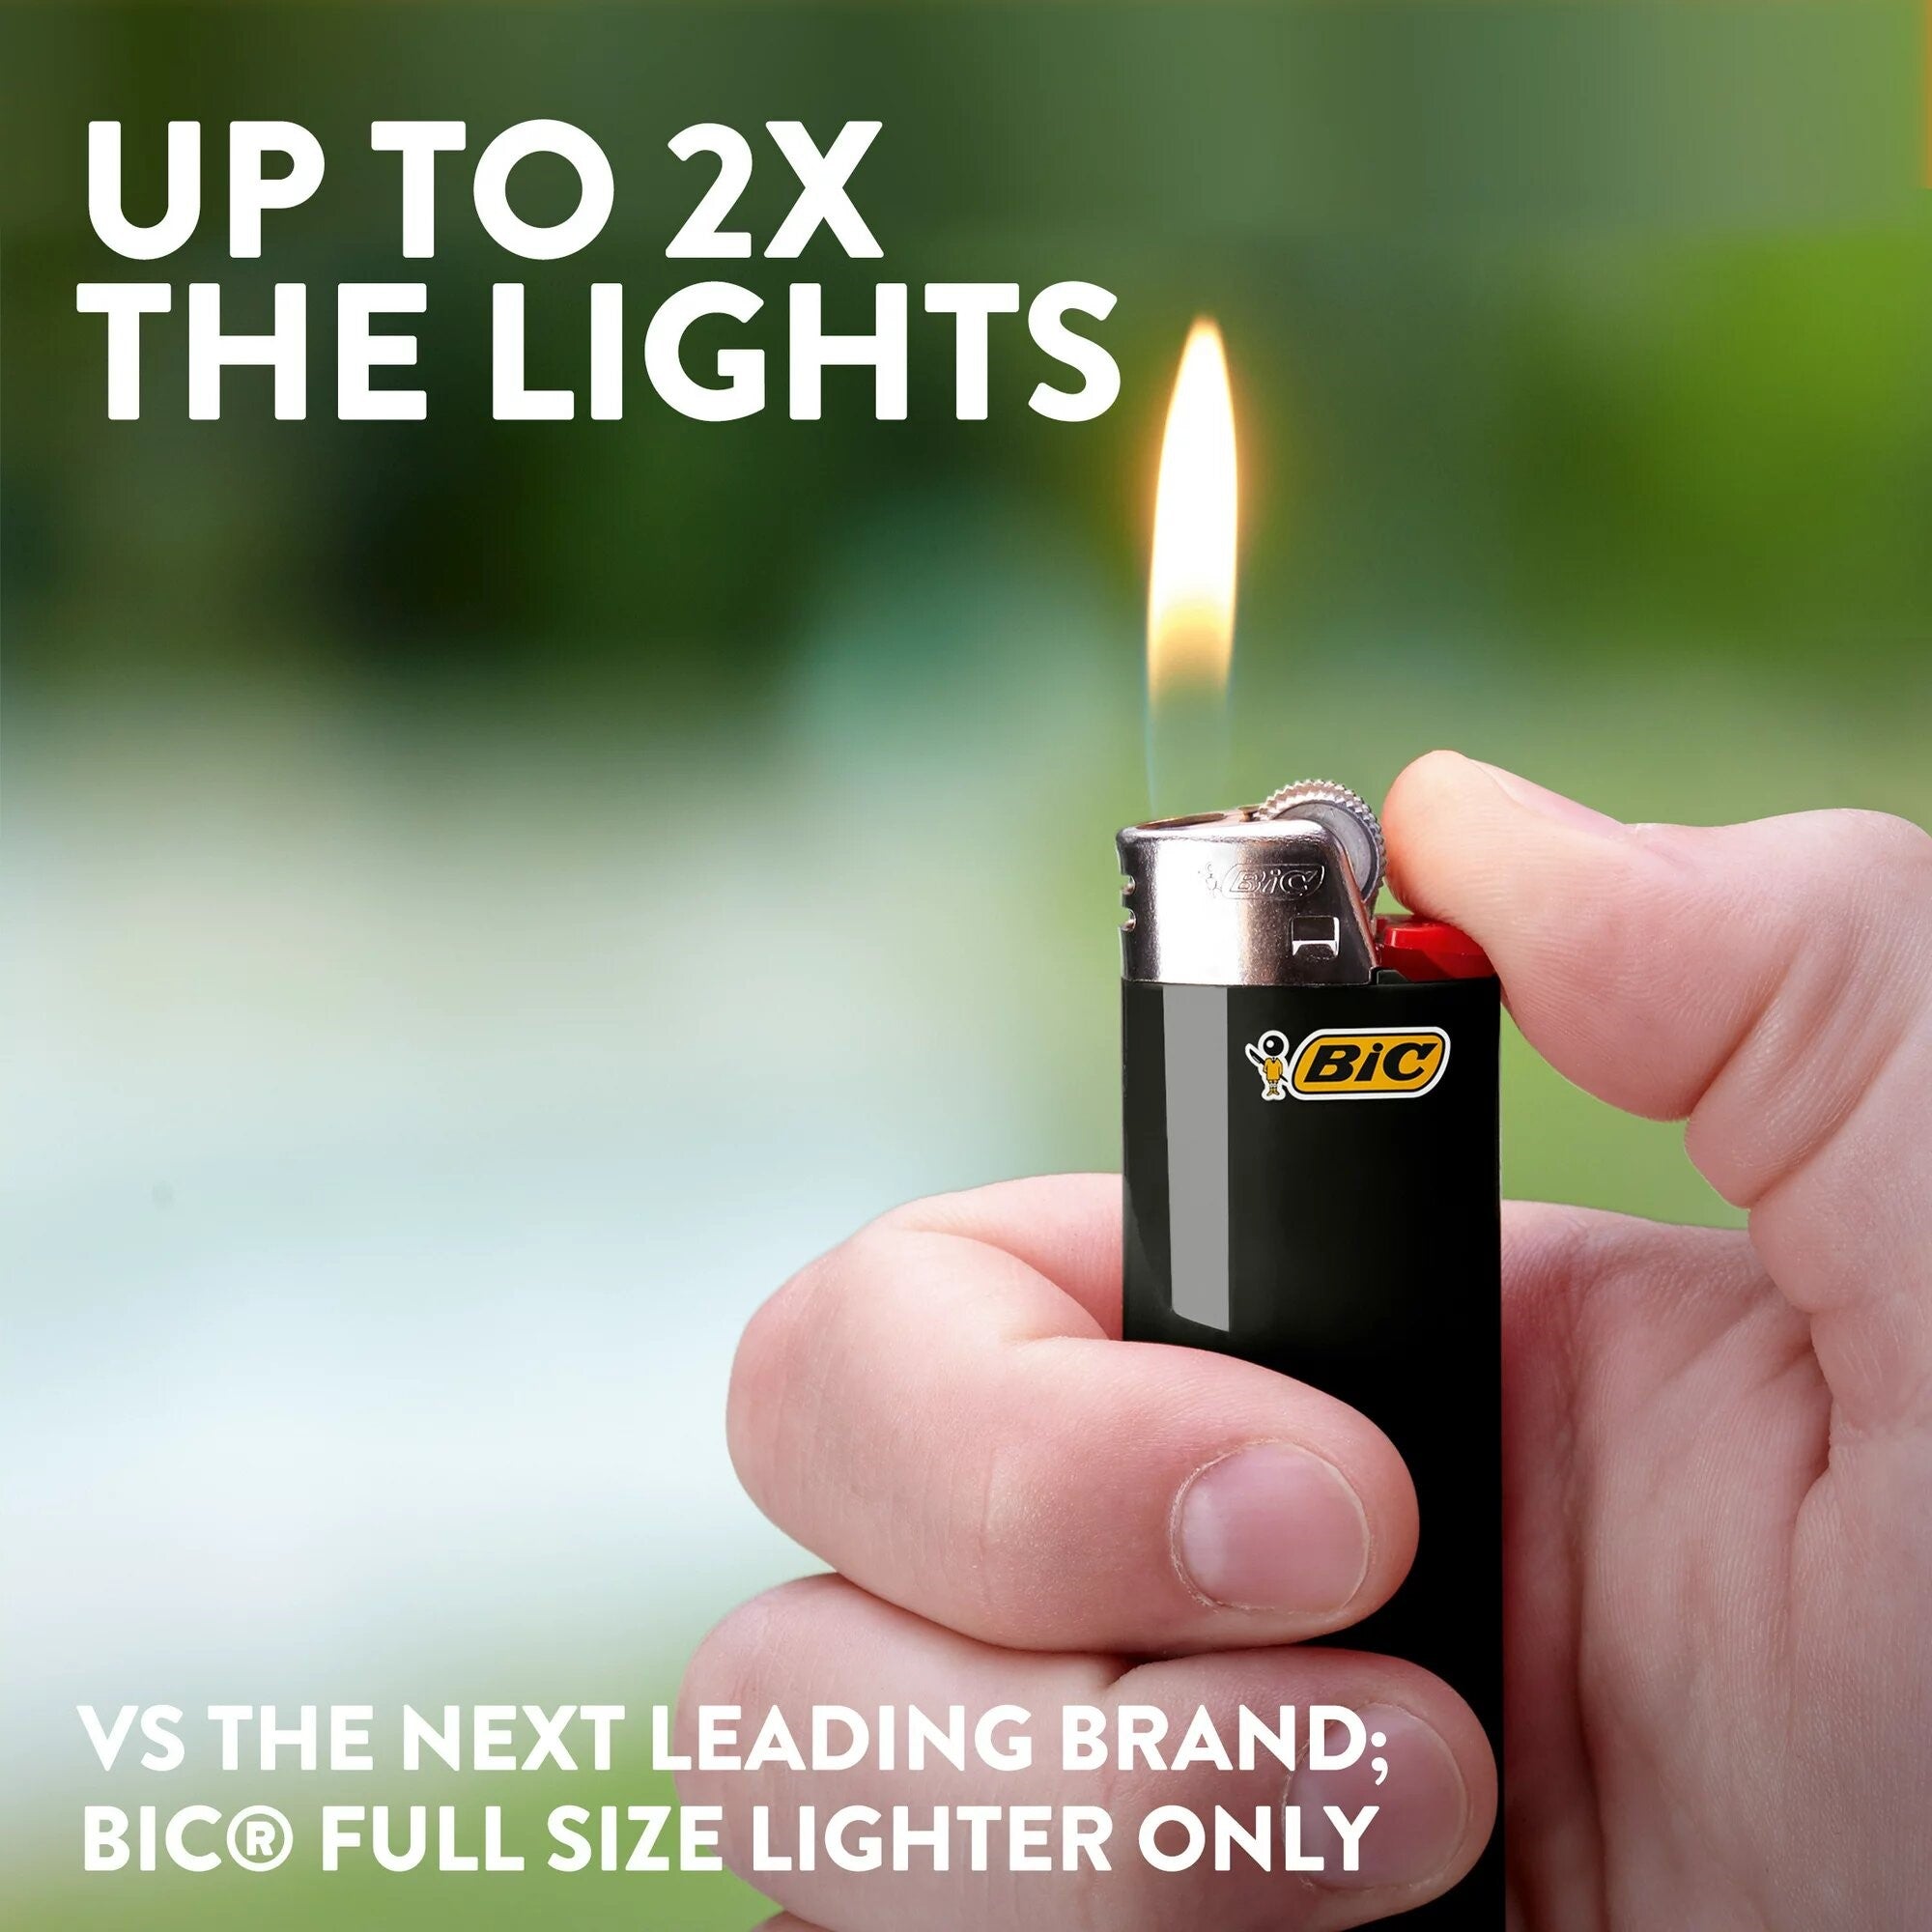 Twice the number of lights of BiC lighters as compared to the nearest competitor